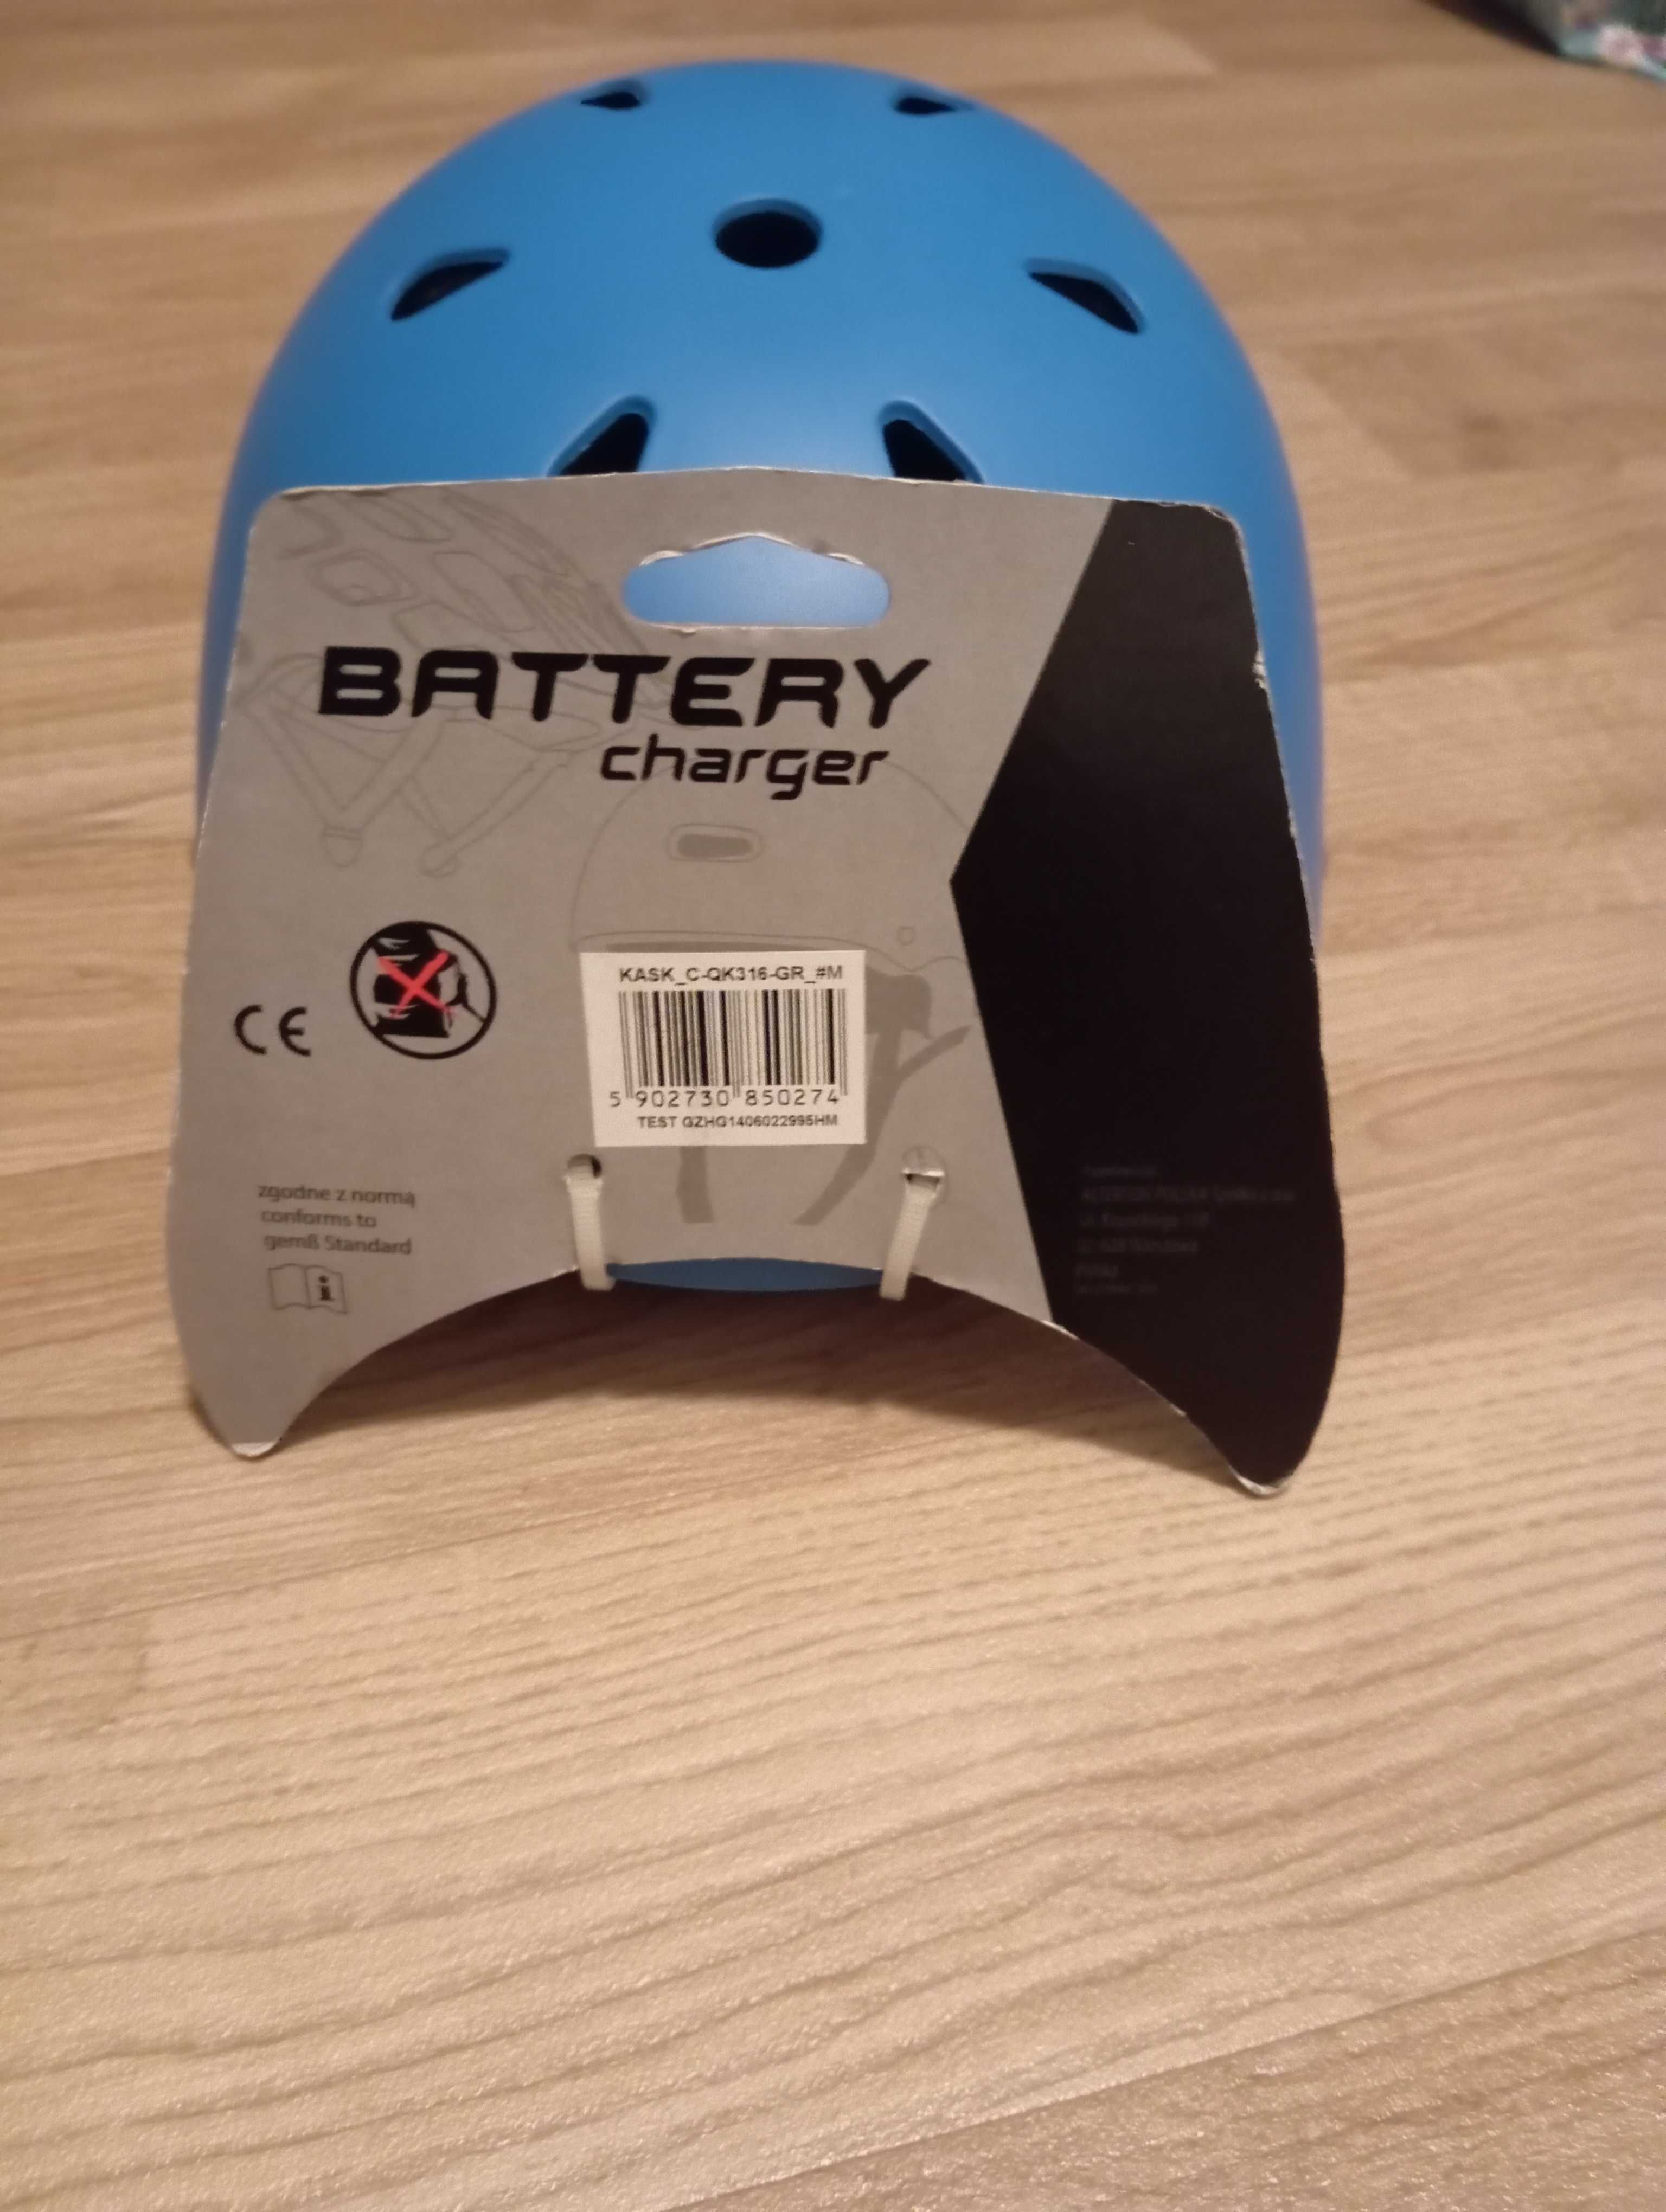 Kask battery charger